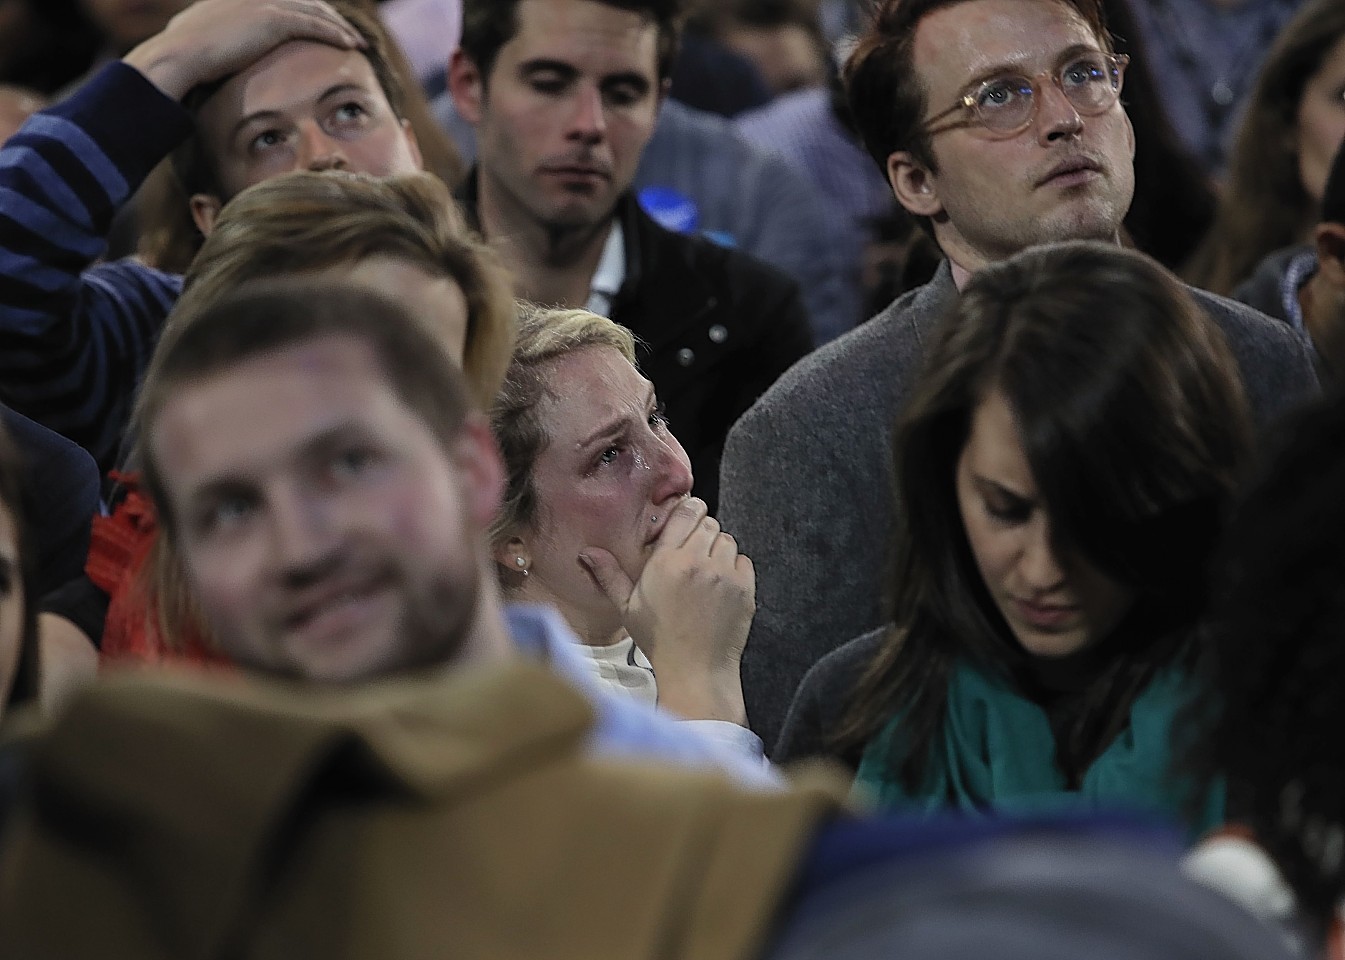 Supporters react to election results during Democratic presidential nominee Hillary Clinton's election night rally in the Jacob Javits Center glass enclosed lobby in New York, Tuesday, Nov. 8, 2016. (AP Photo/Frank Franklin II)